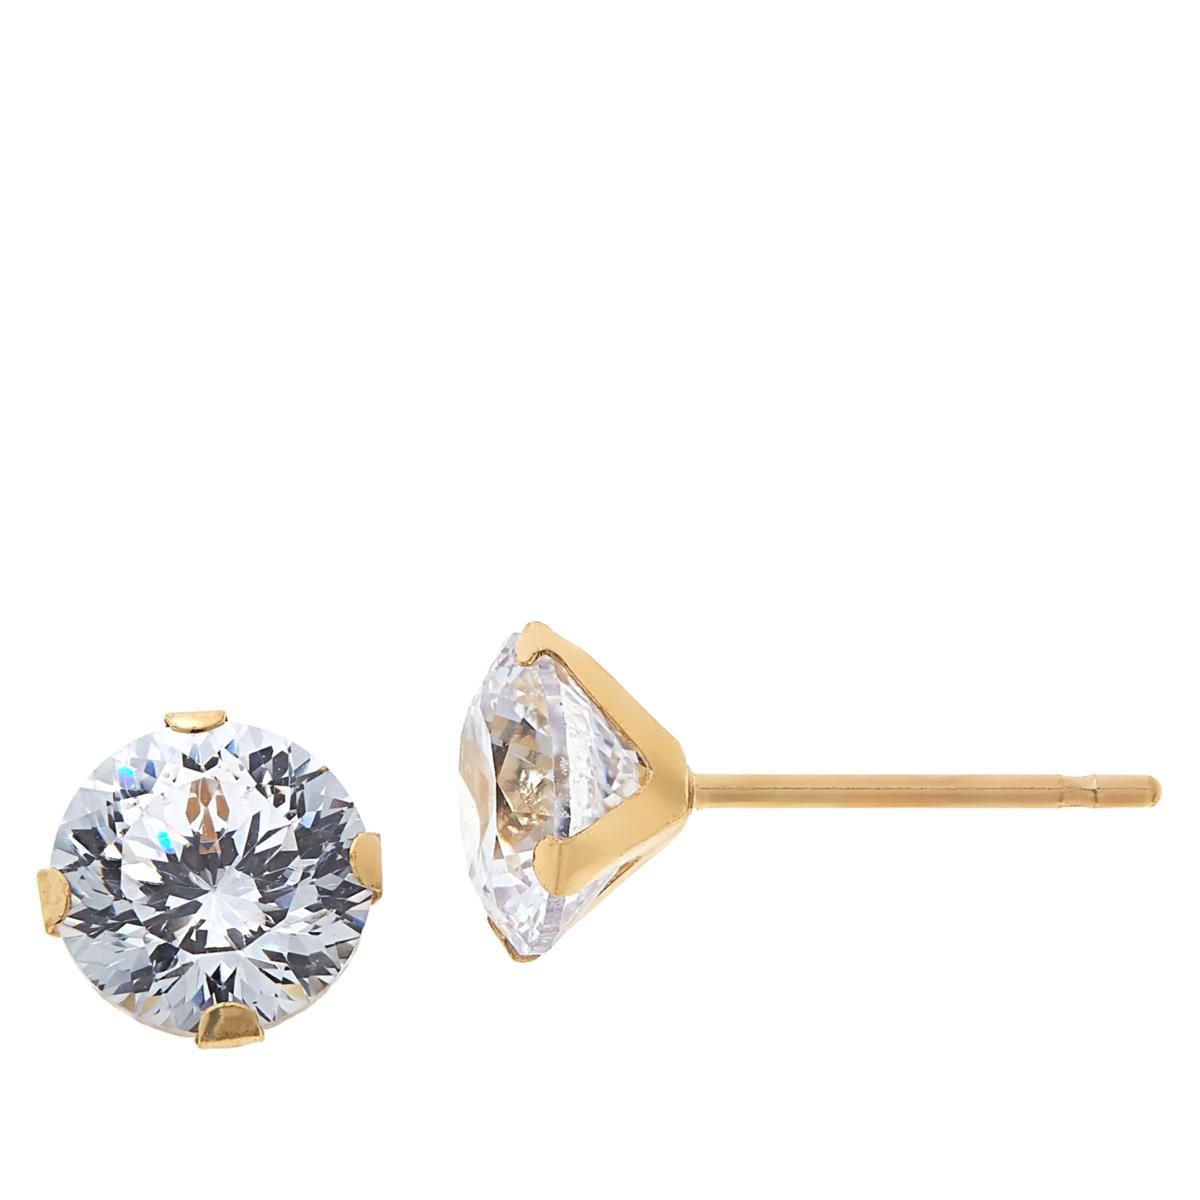 Absolute™ 14K Gold Cubic Zirconia 6mm 120-Facet Round Stud Earrings - 20257581 | HSN | HSN